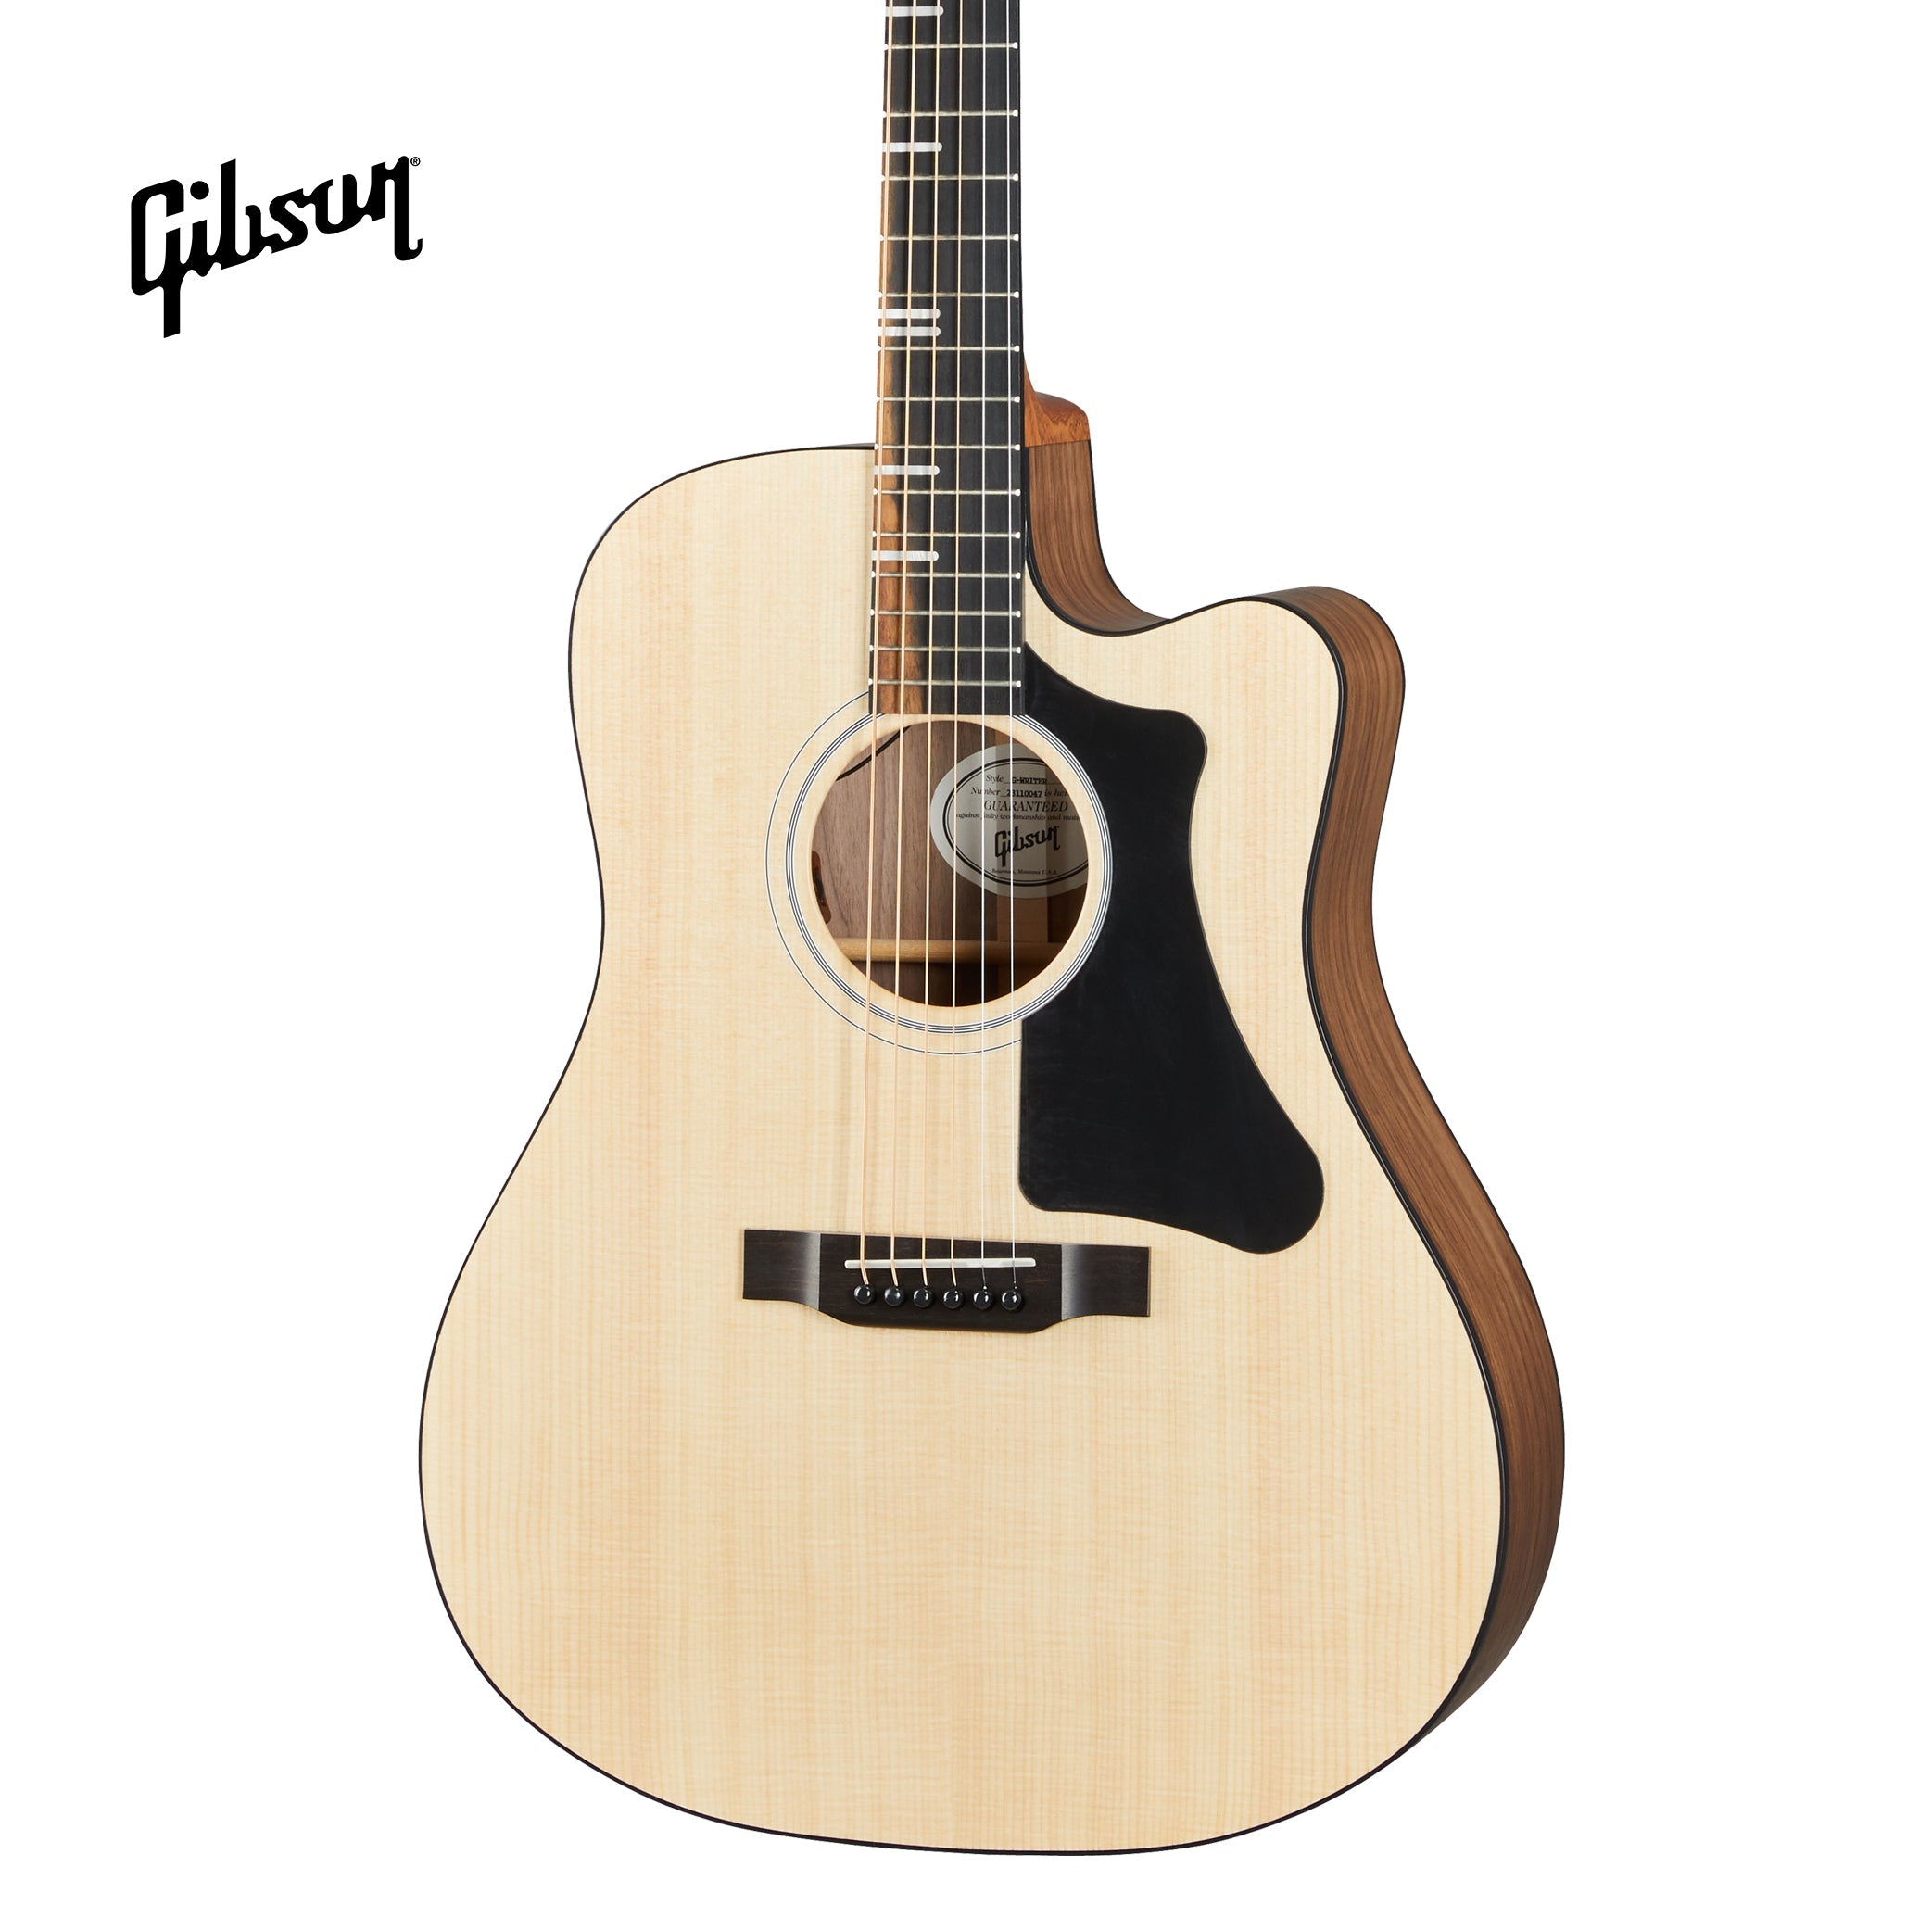 GIBSON G-WRITER EC ACOUSTIC-ELECTRIC GUITAR - NATURAL